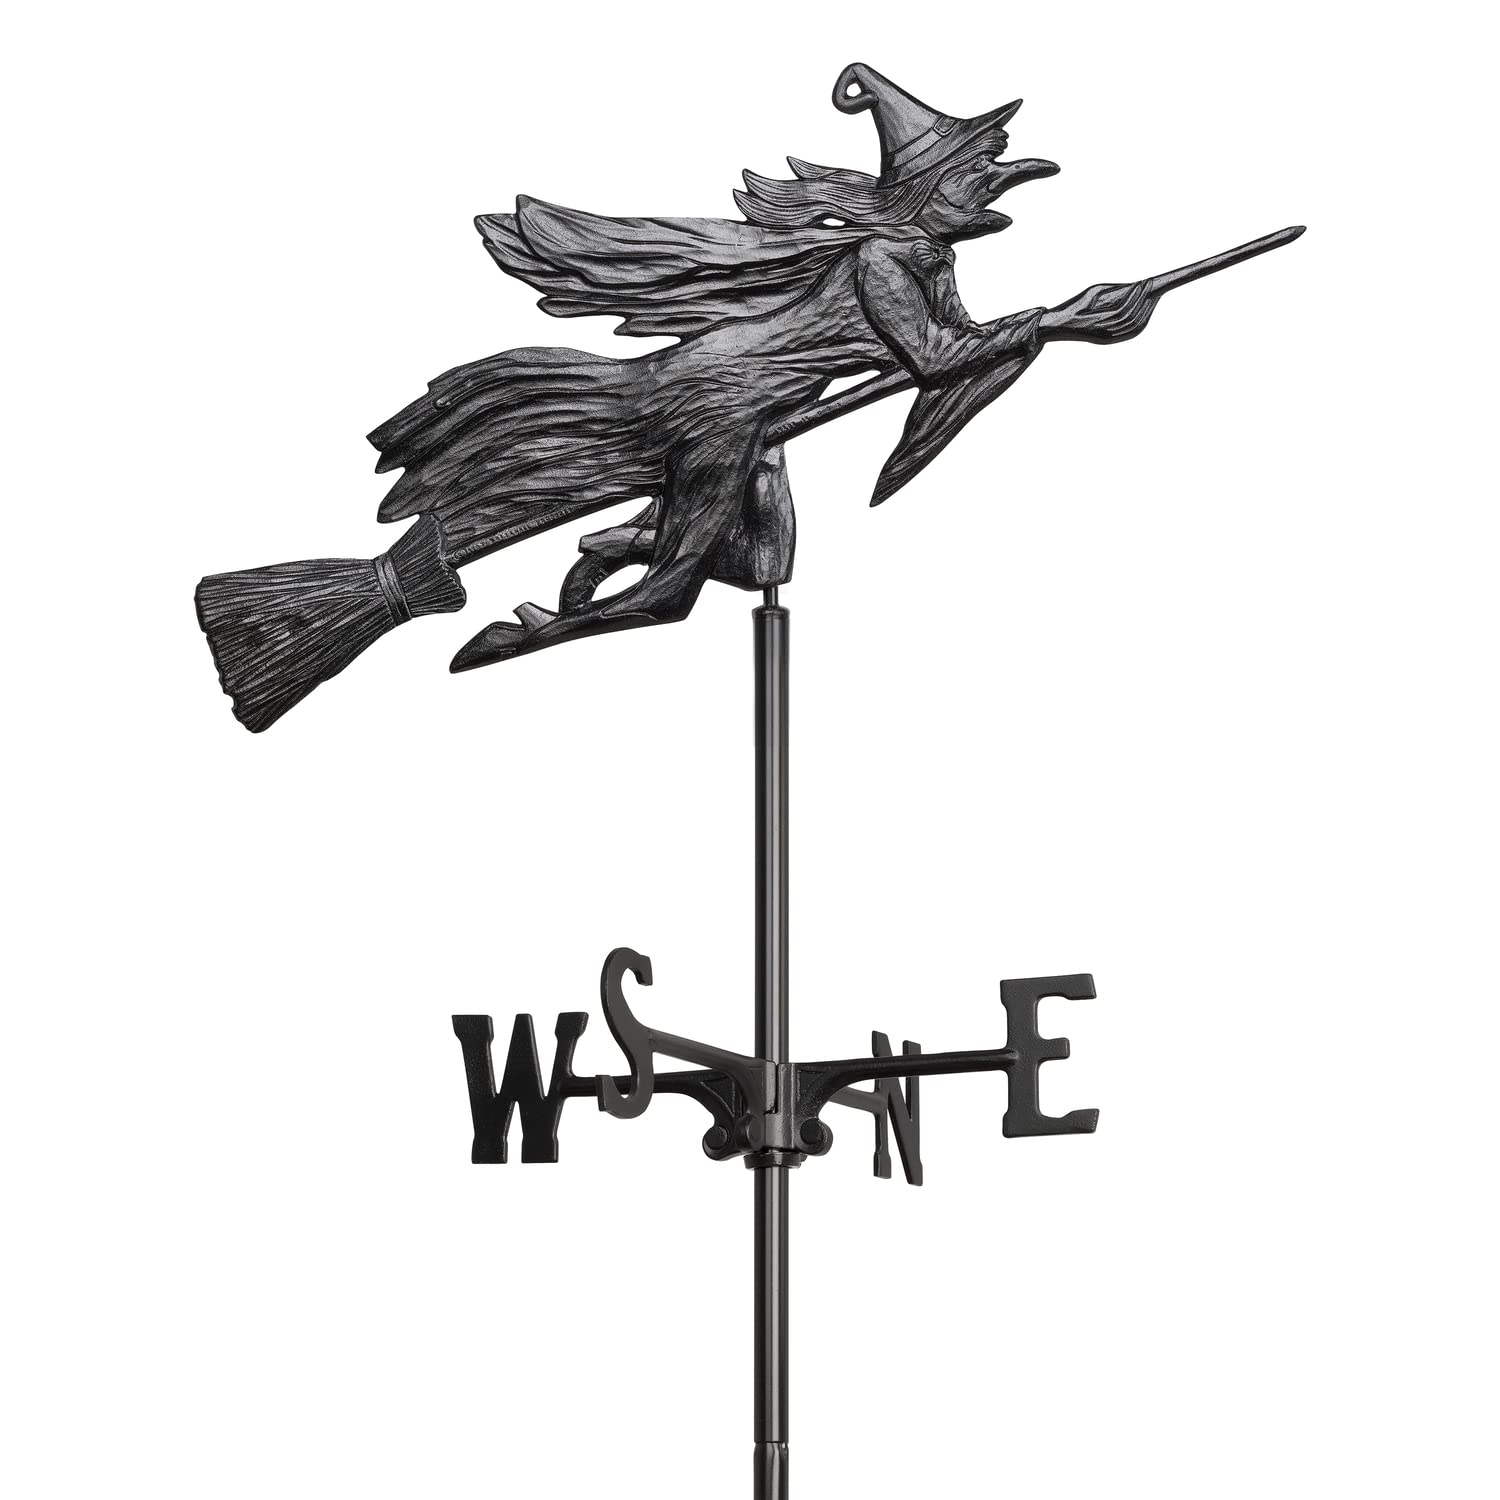 Whitehall Products Flying Witch garden Weathervane, Black